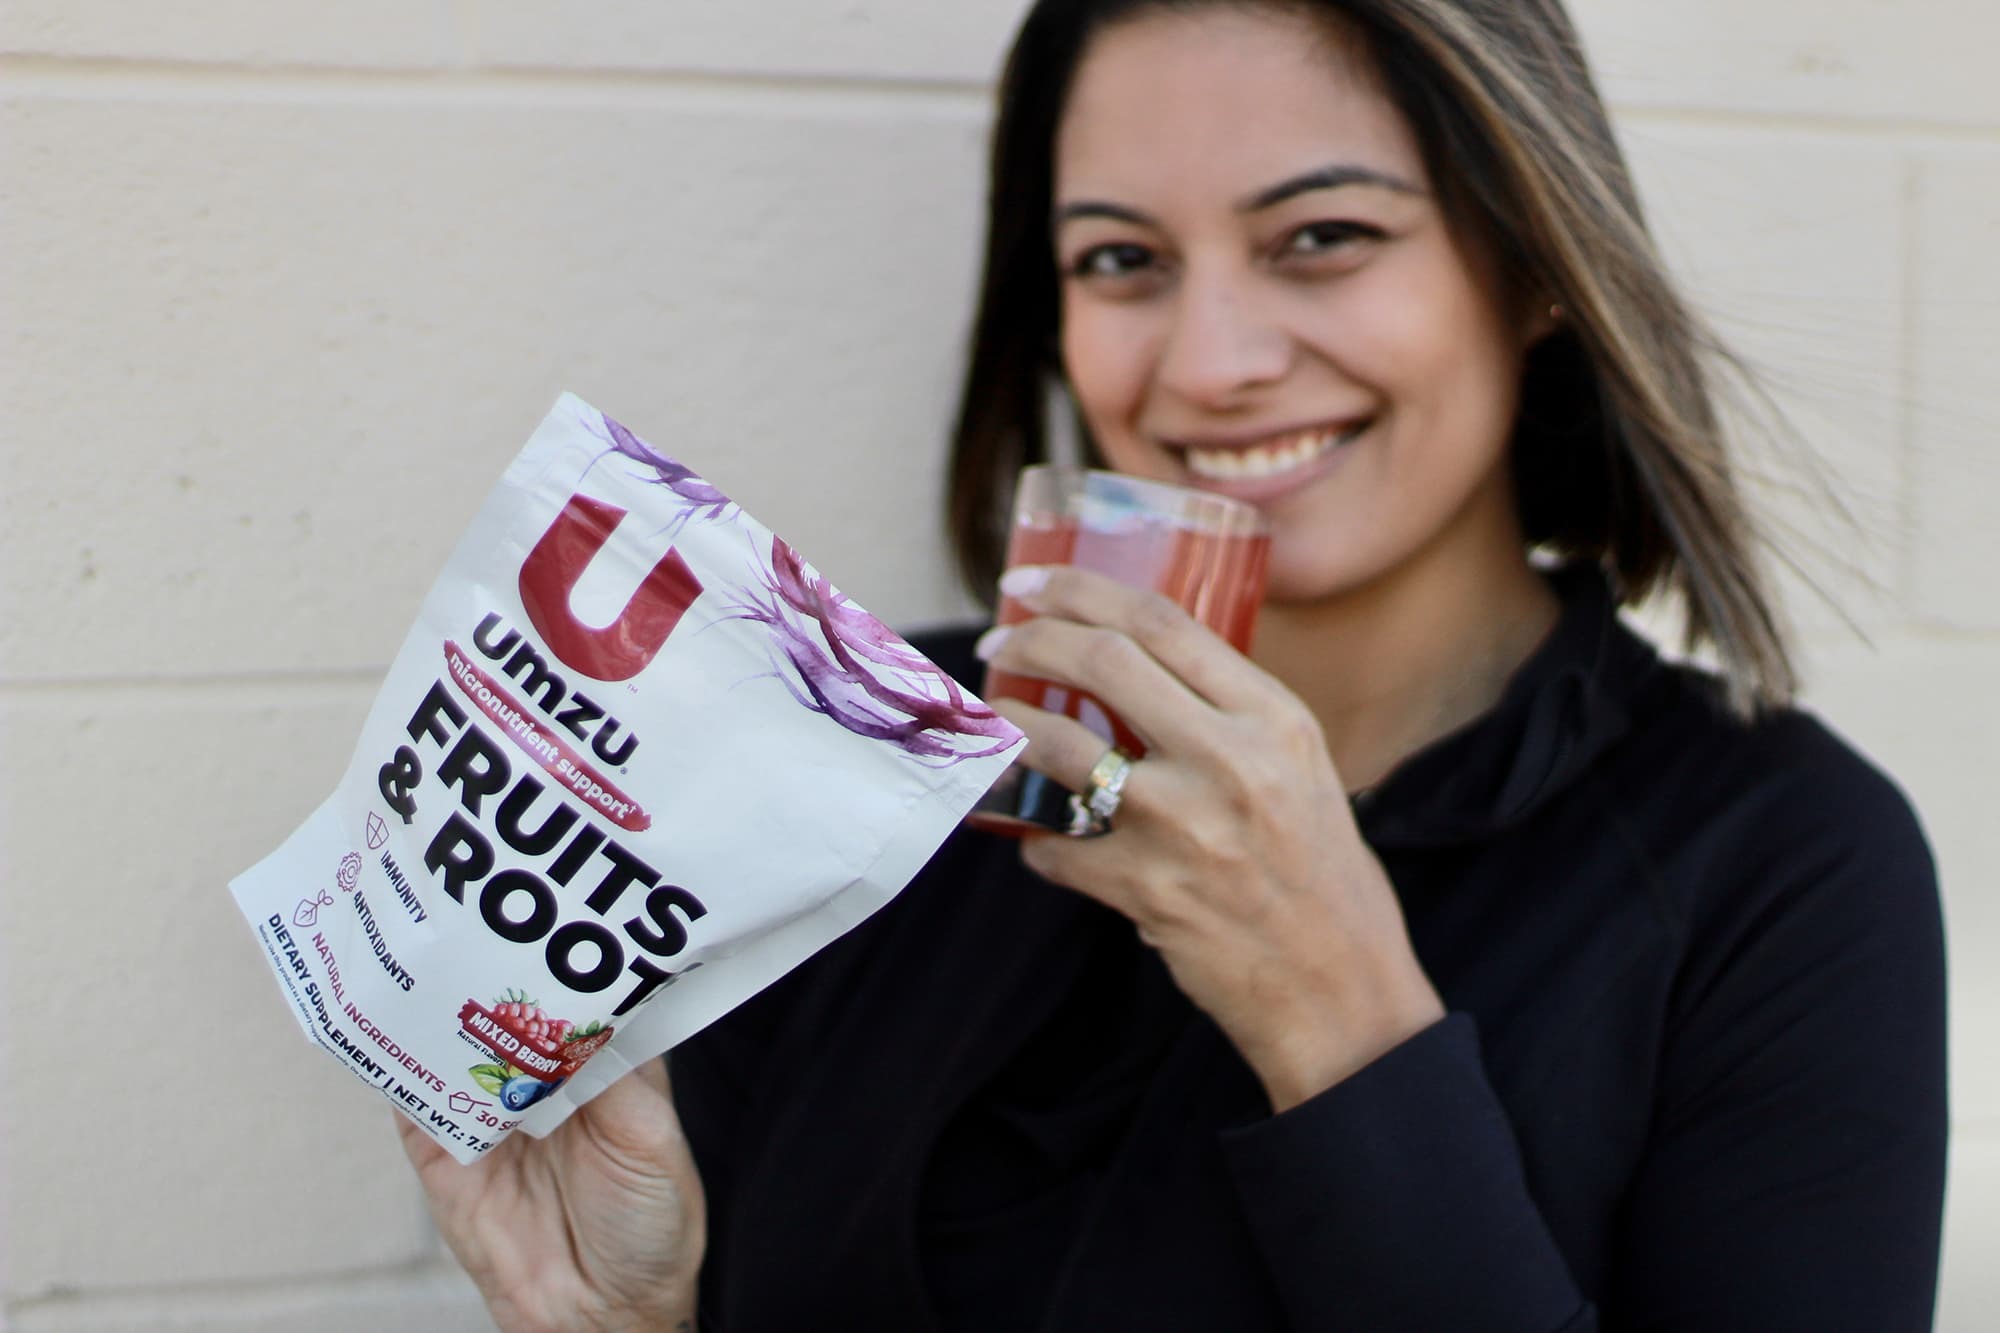 FRUITS & ROOTS™: Fruit-Based Micronutrient Support